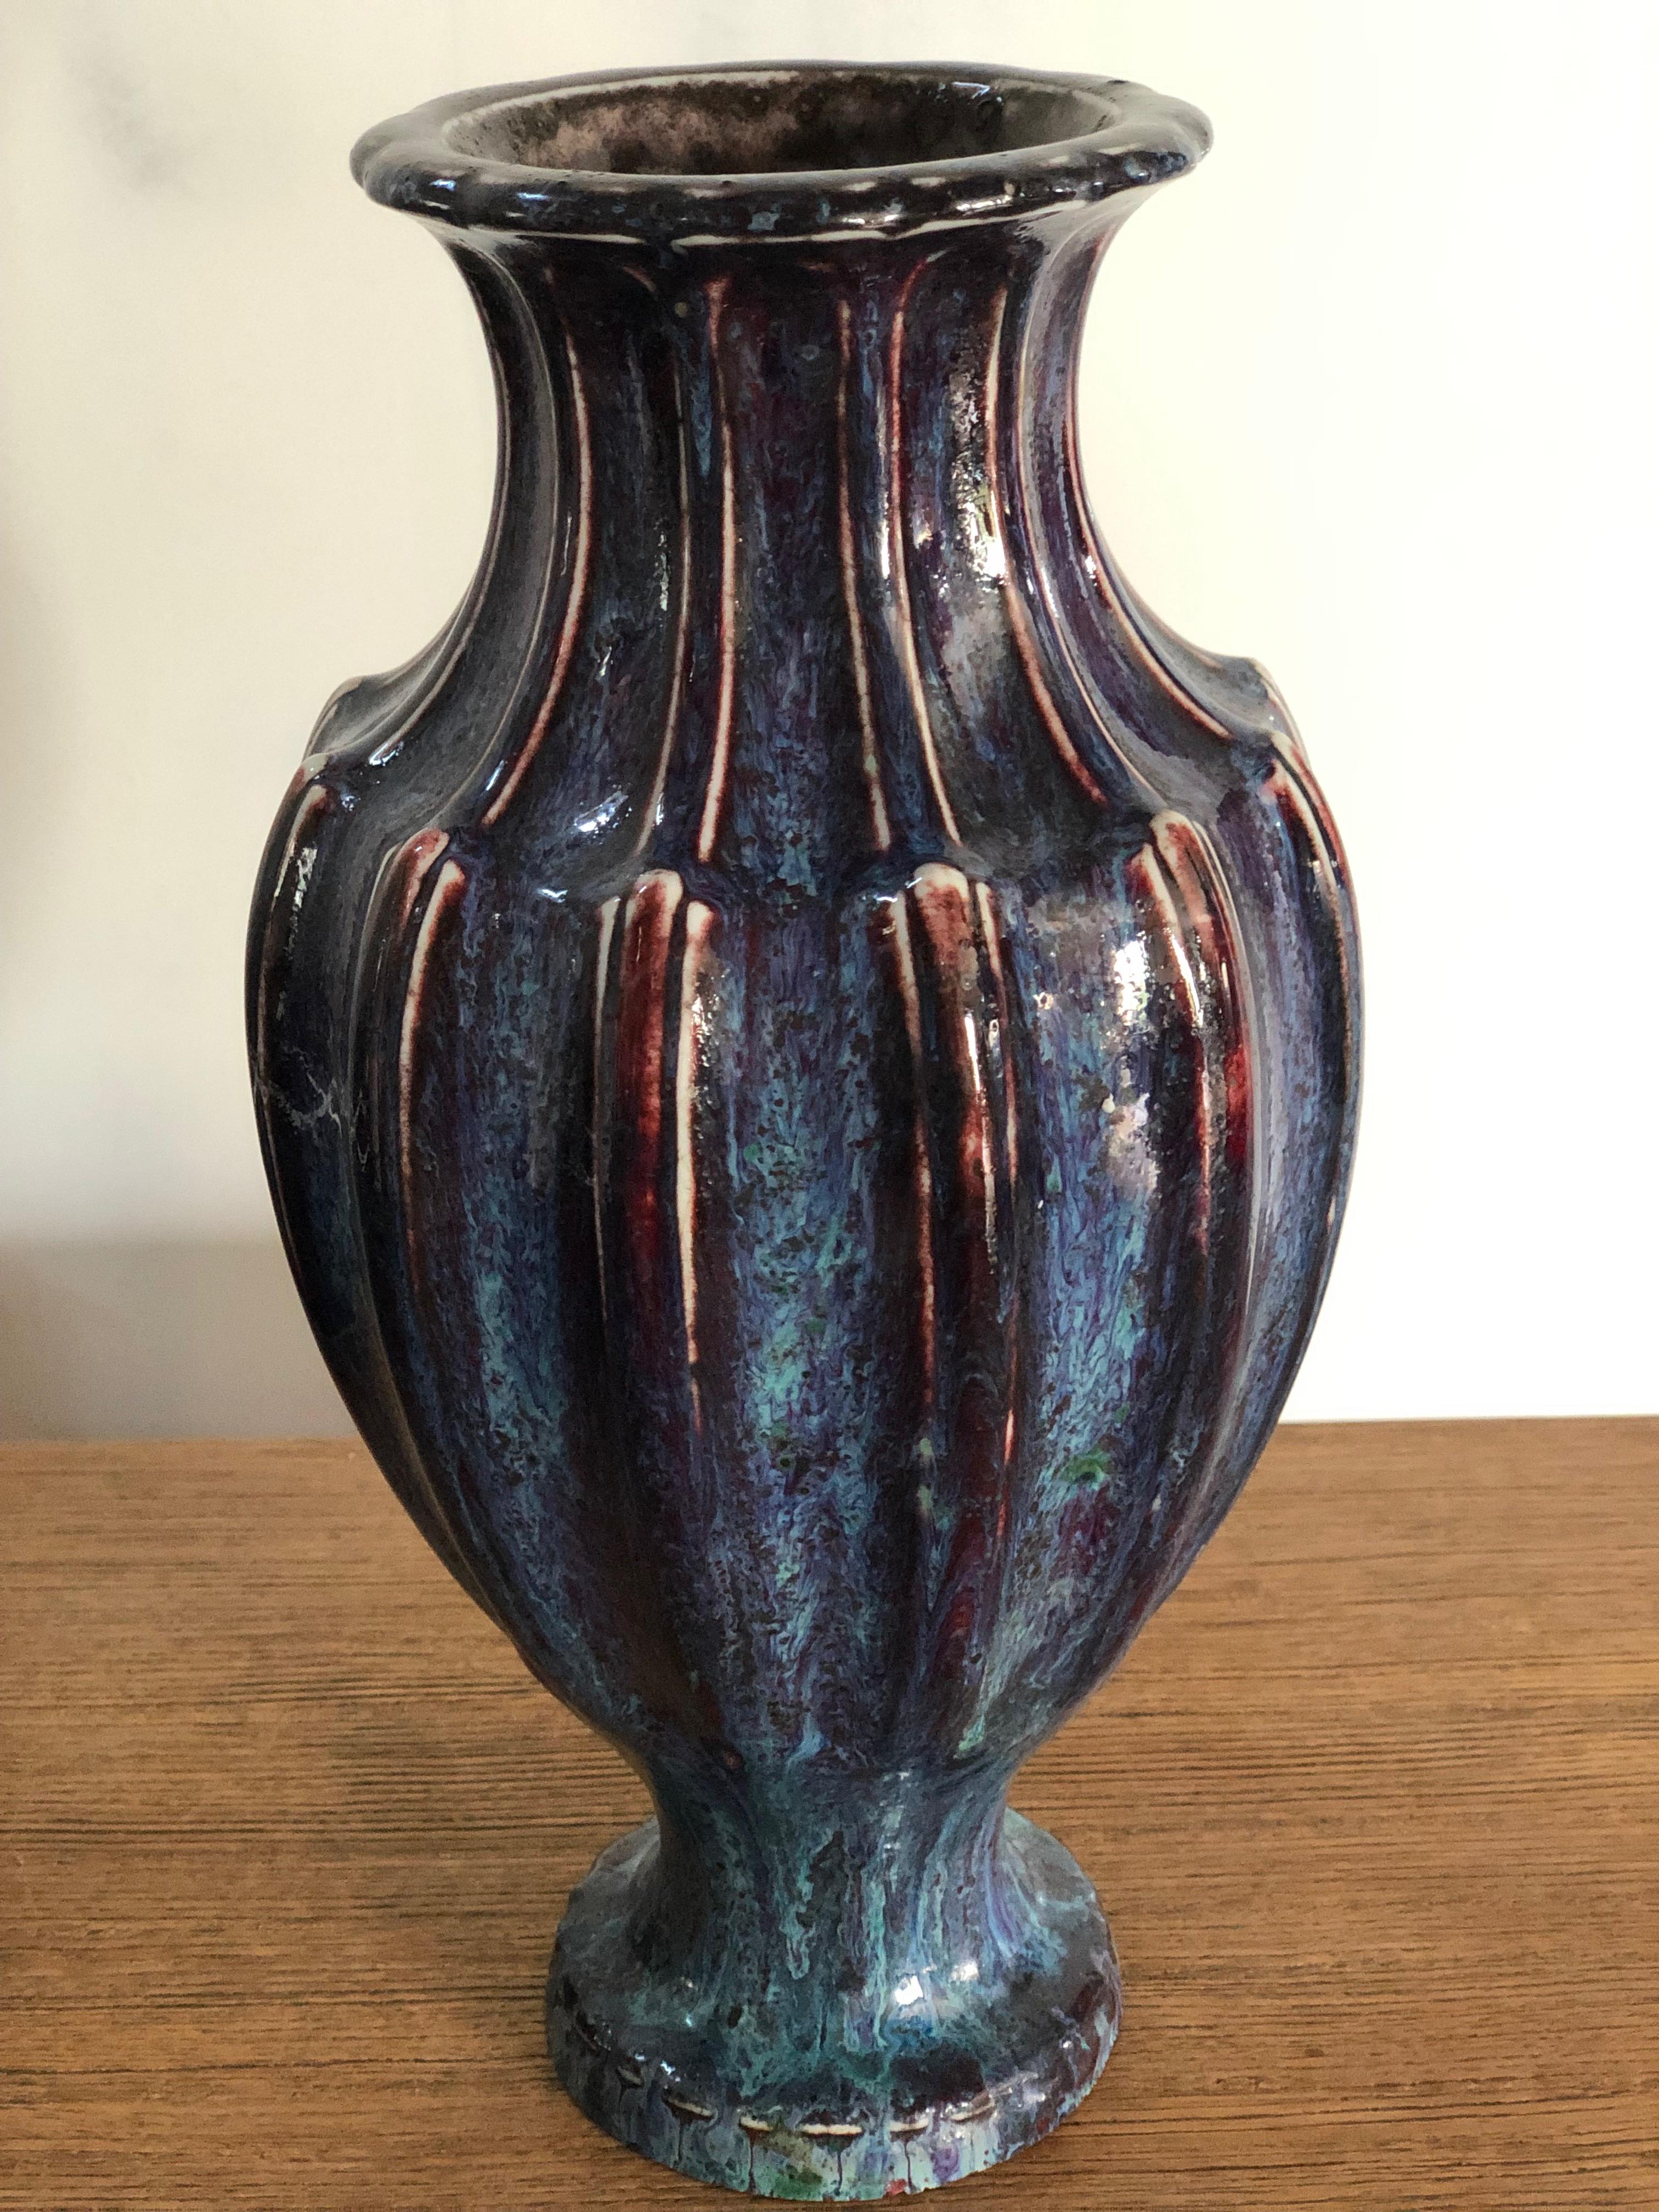 The Manufacture de Sèvres first produced their sang de boeuf glazes in the early 1880s, this is a porcelain vase made in 1889, it is inscribed on the underside AD 89 12 PN and the S89 stamp which has faded slightly. It has great ribbed shape with